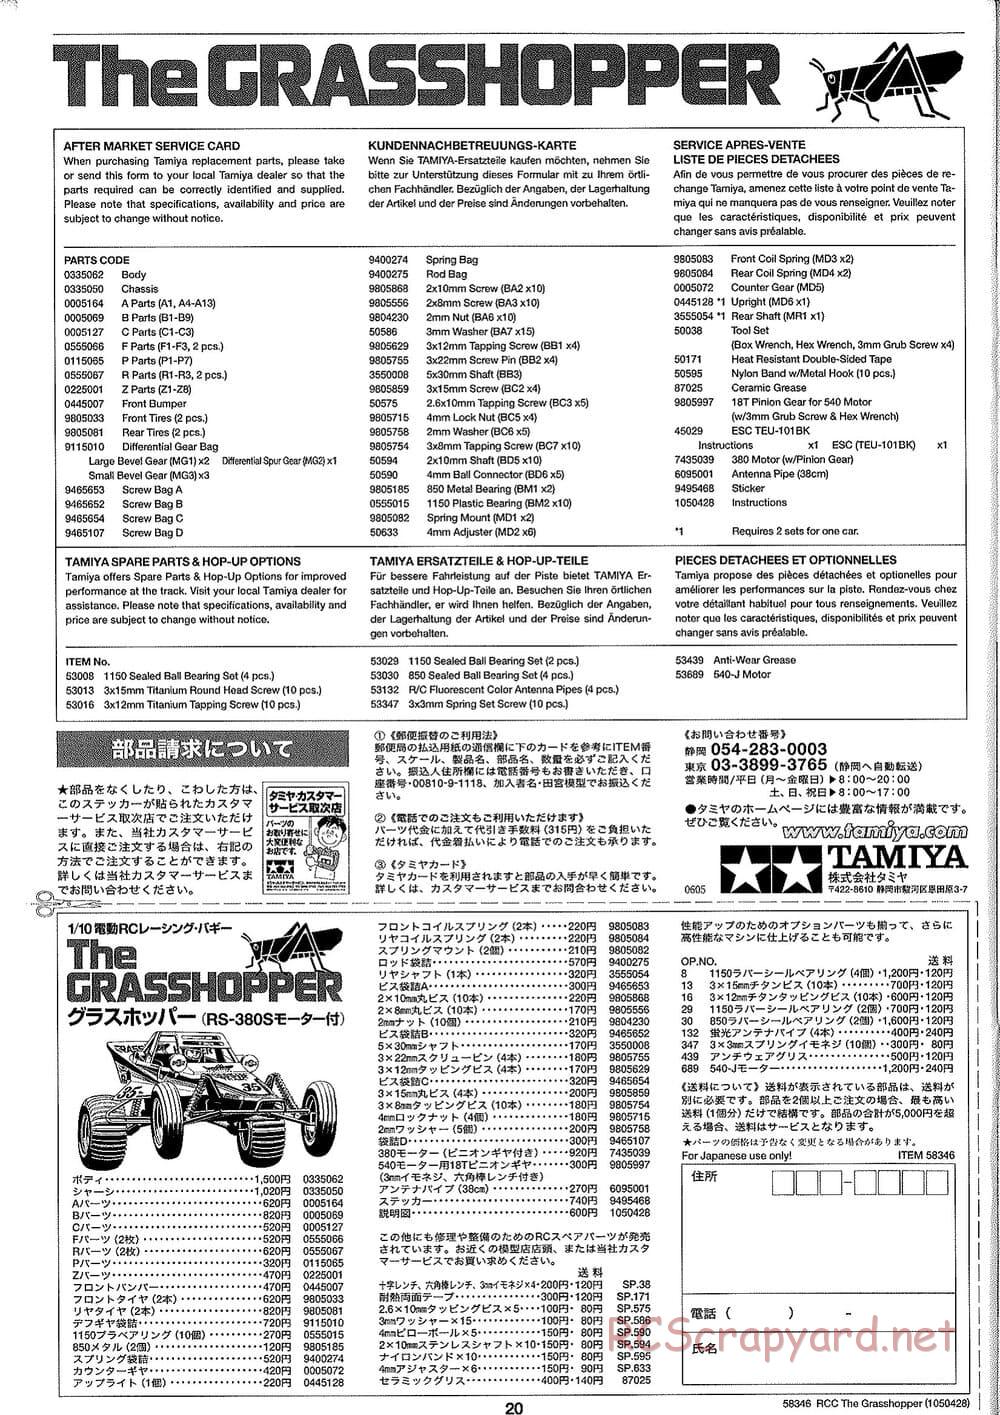 Tamiya - The Grasshopper (2005) - GH Chassis - Manual - Page 20